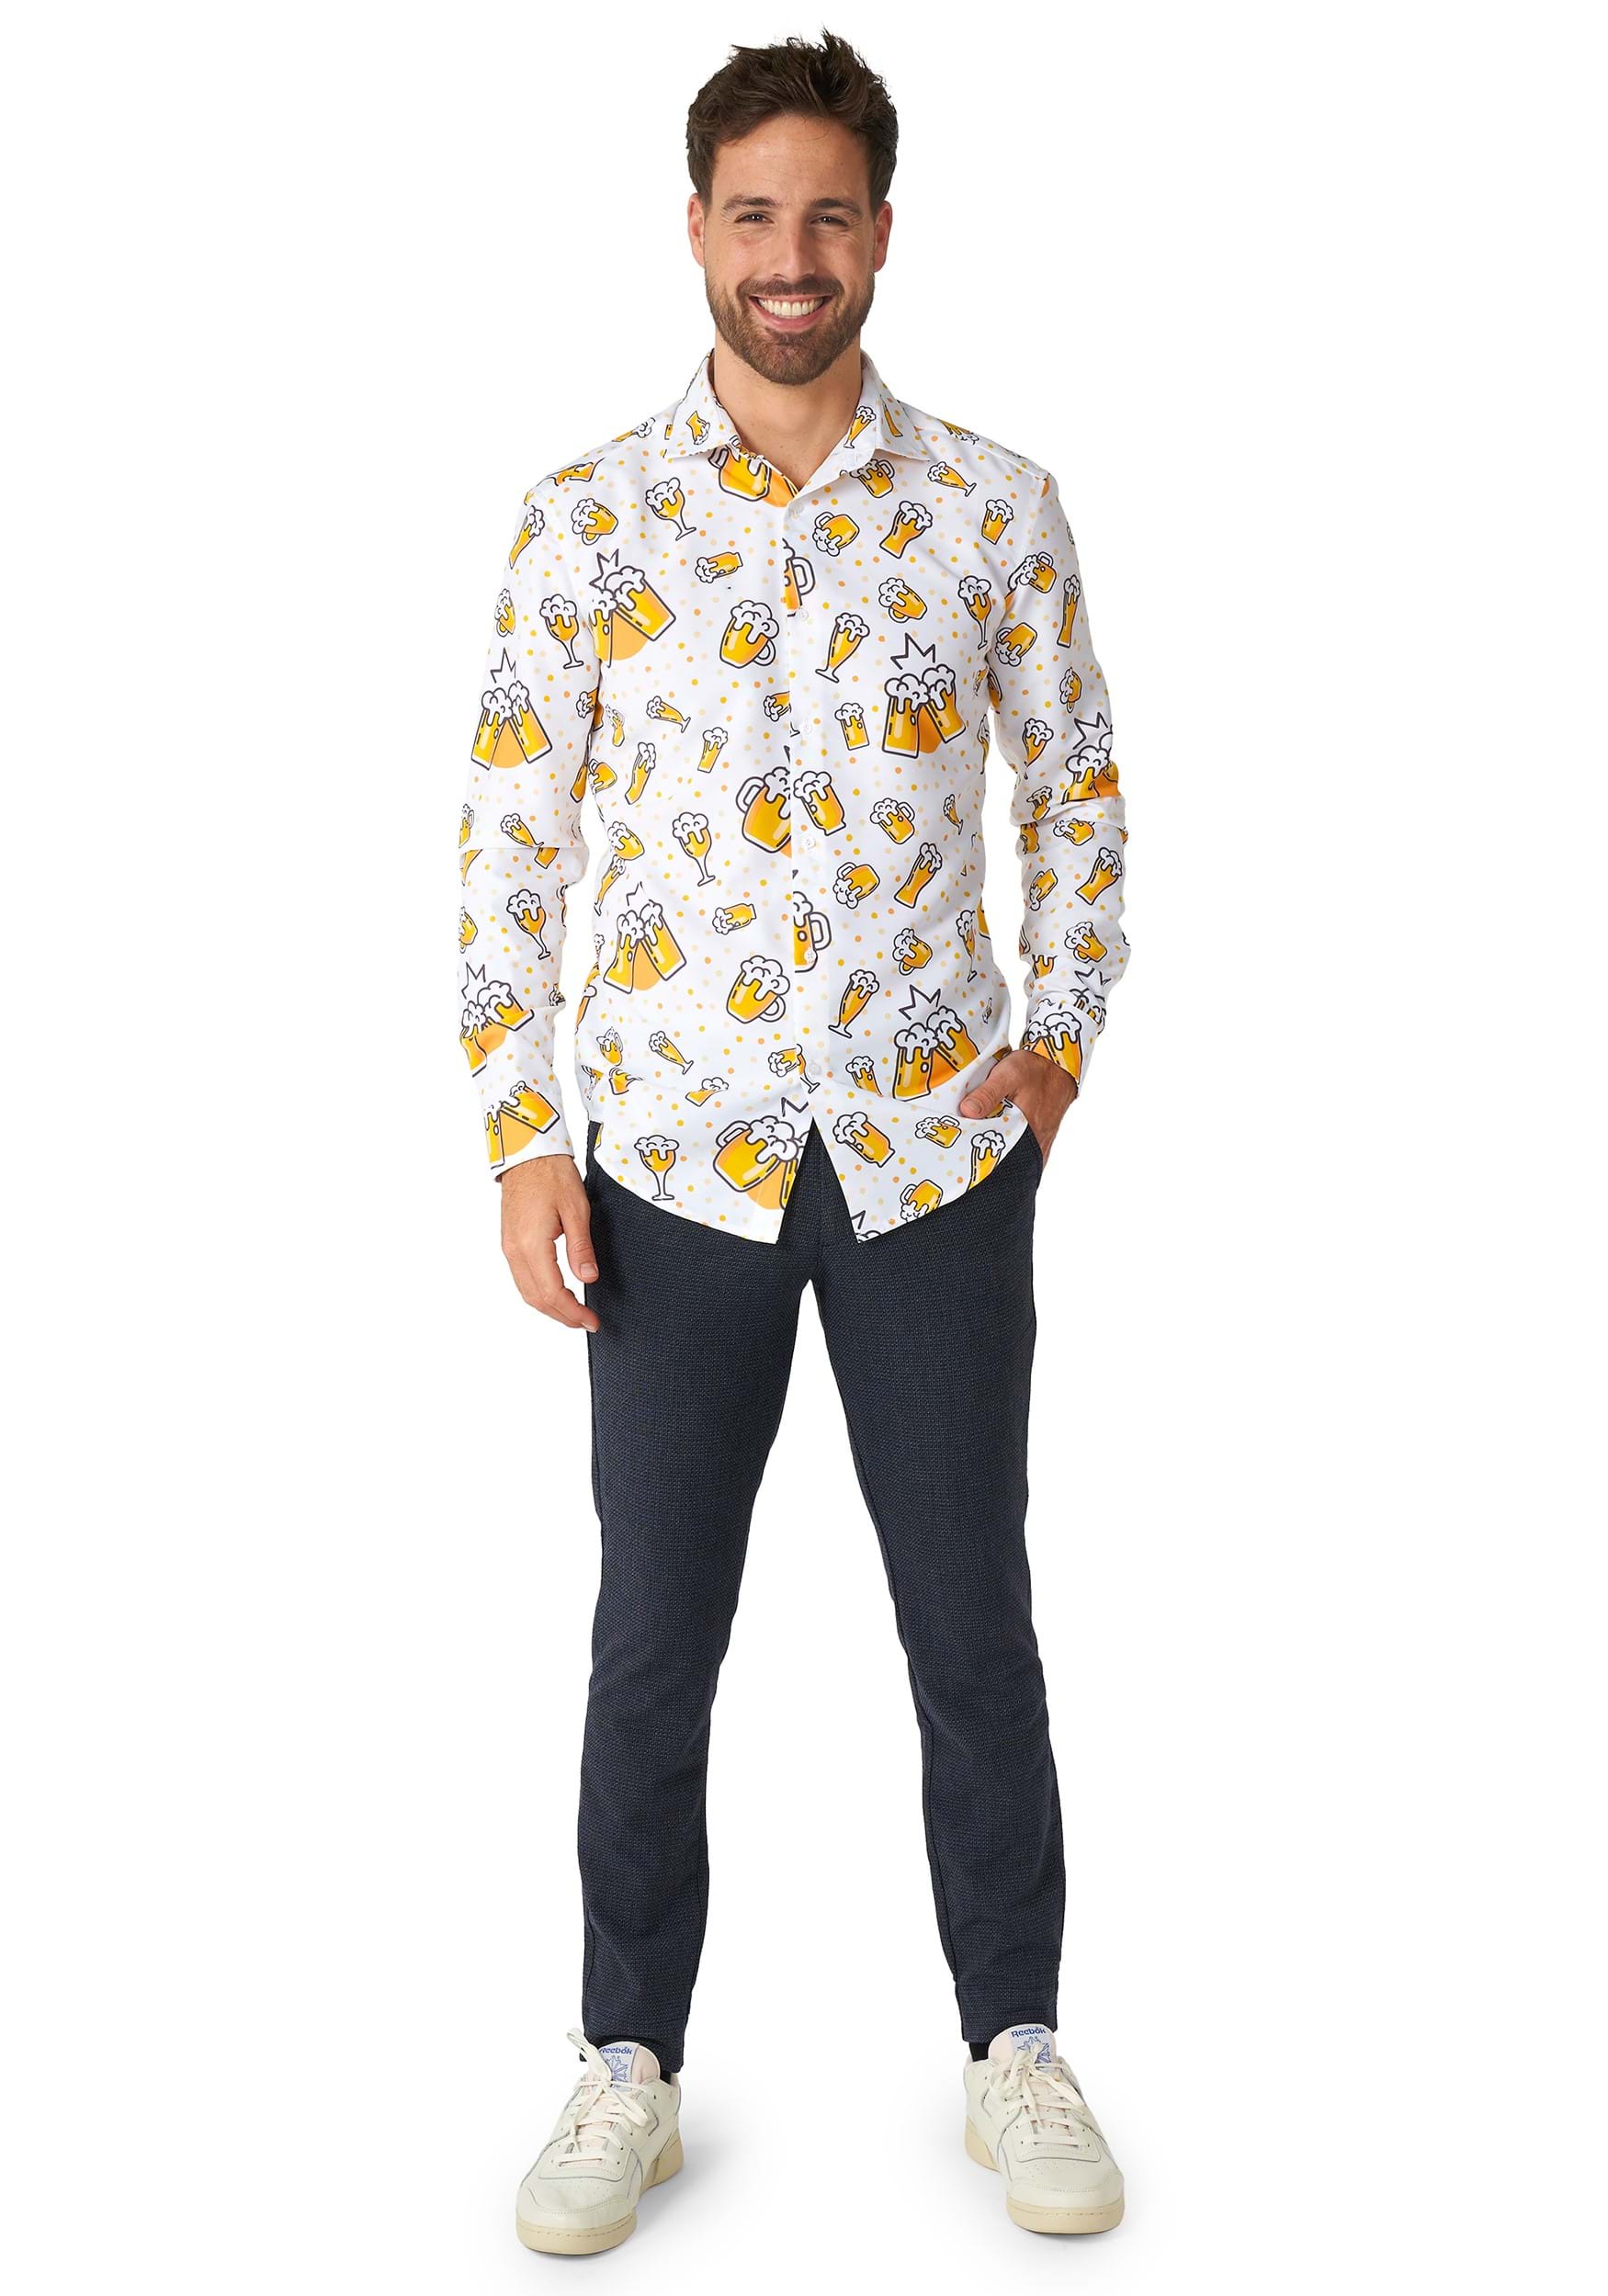 Men's Button Up Beer White Shirt